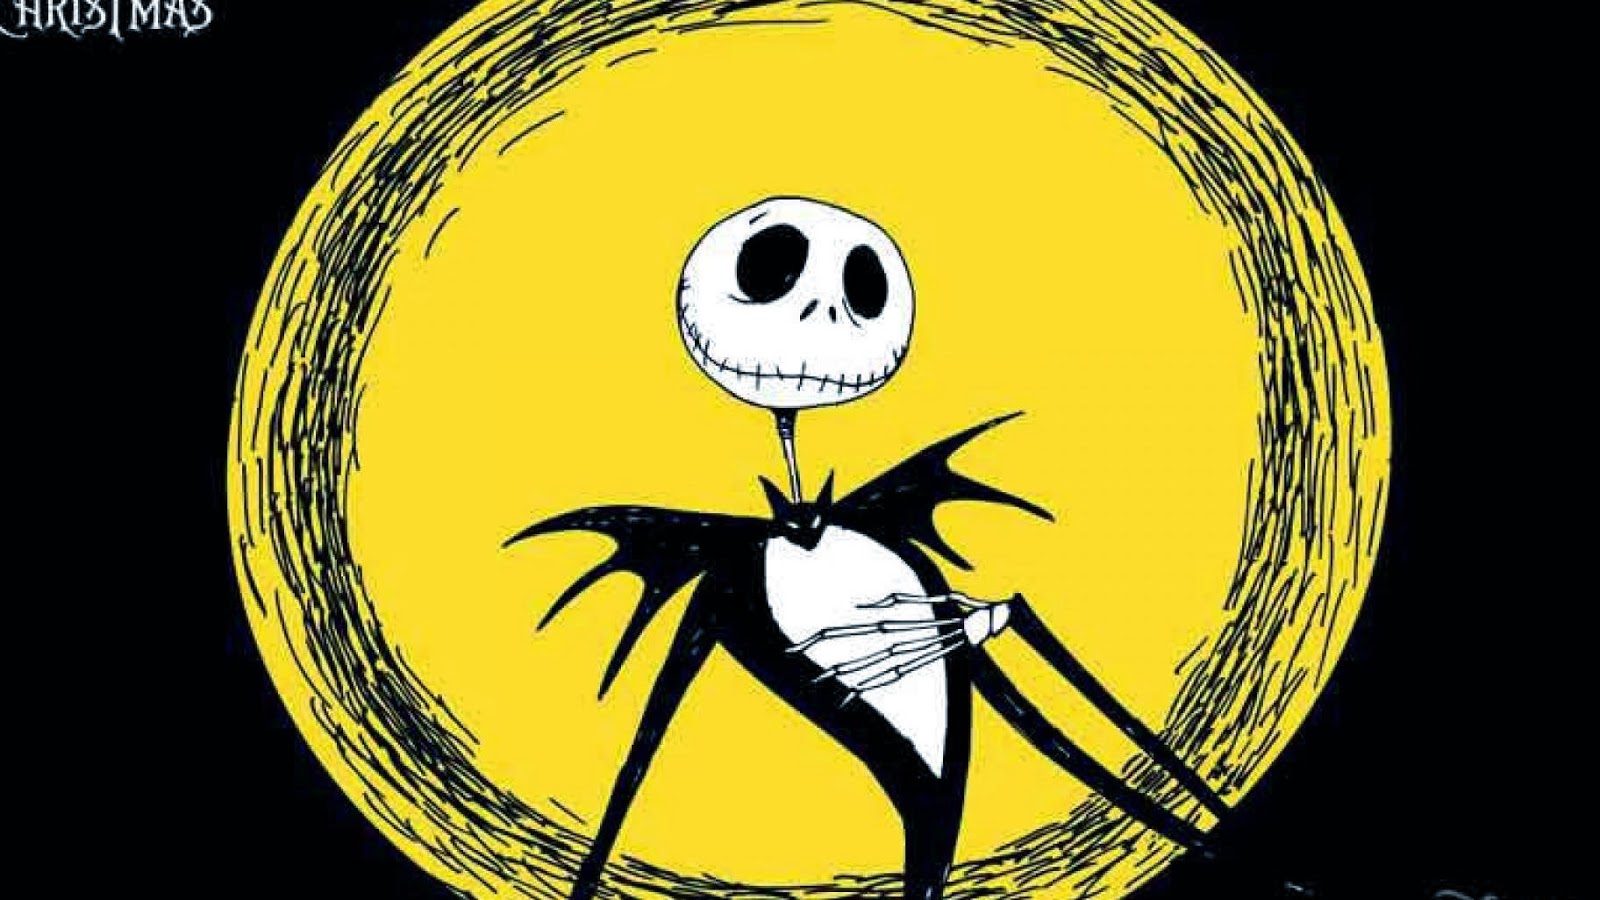 Nightmare Before Christmas Superb Collection Of HD Wallpaper Most